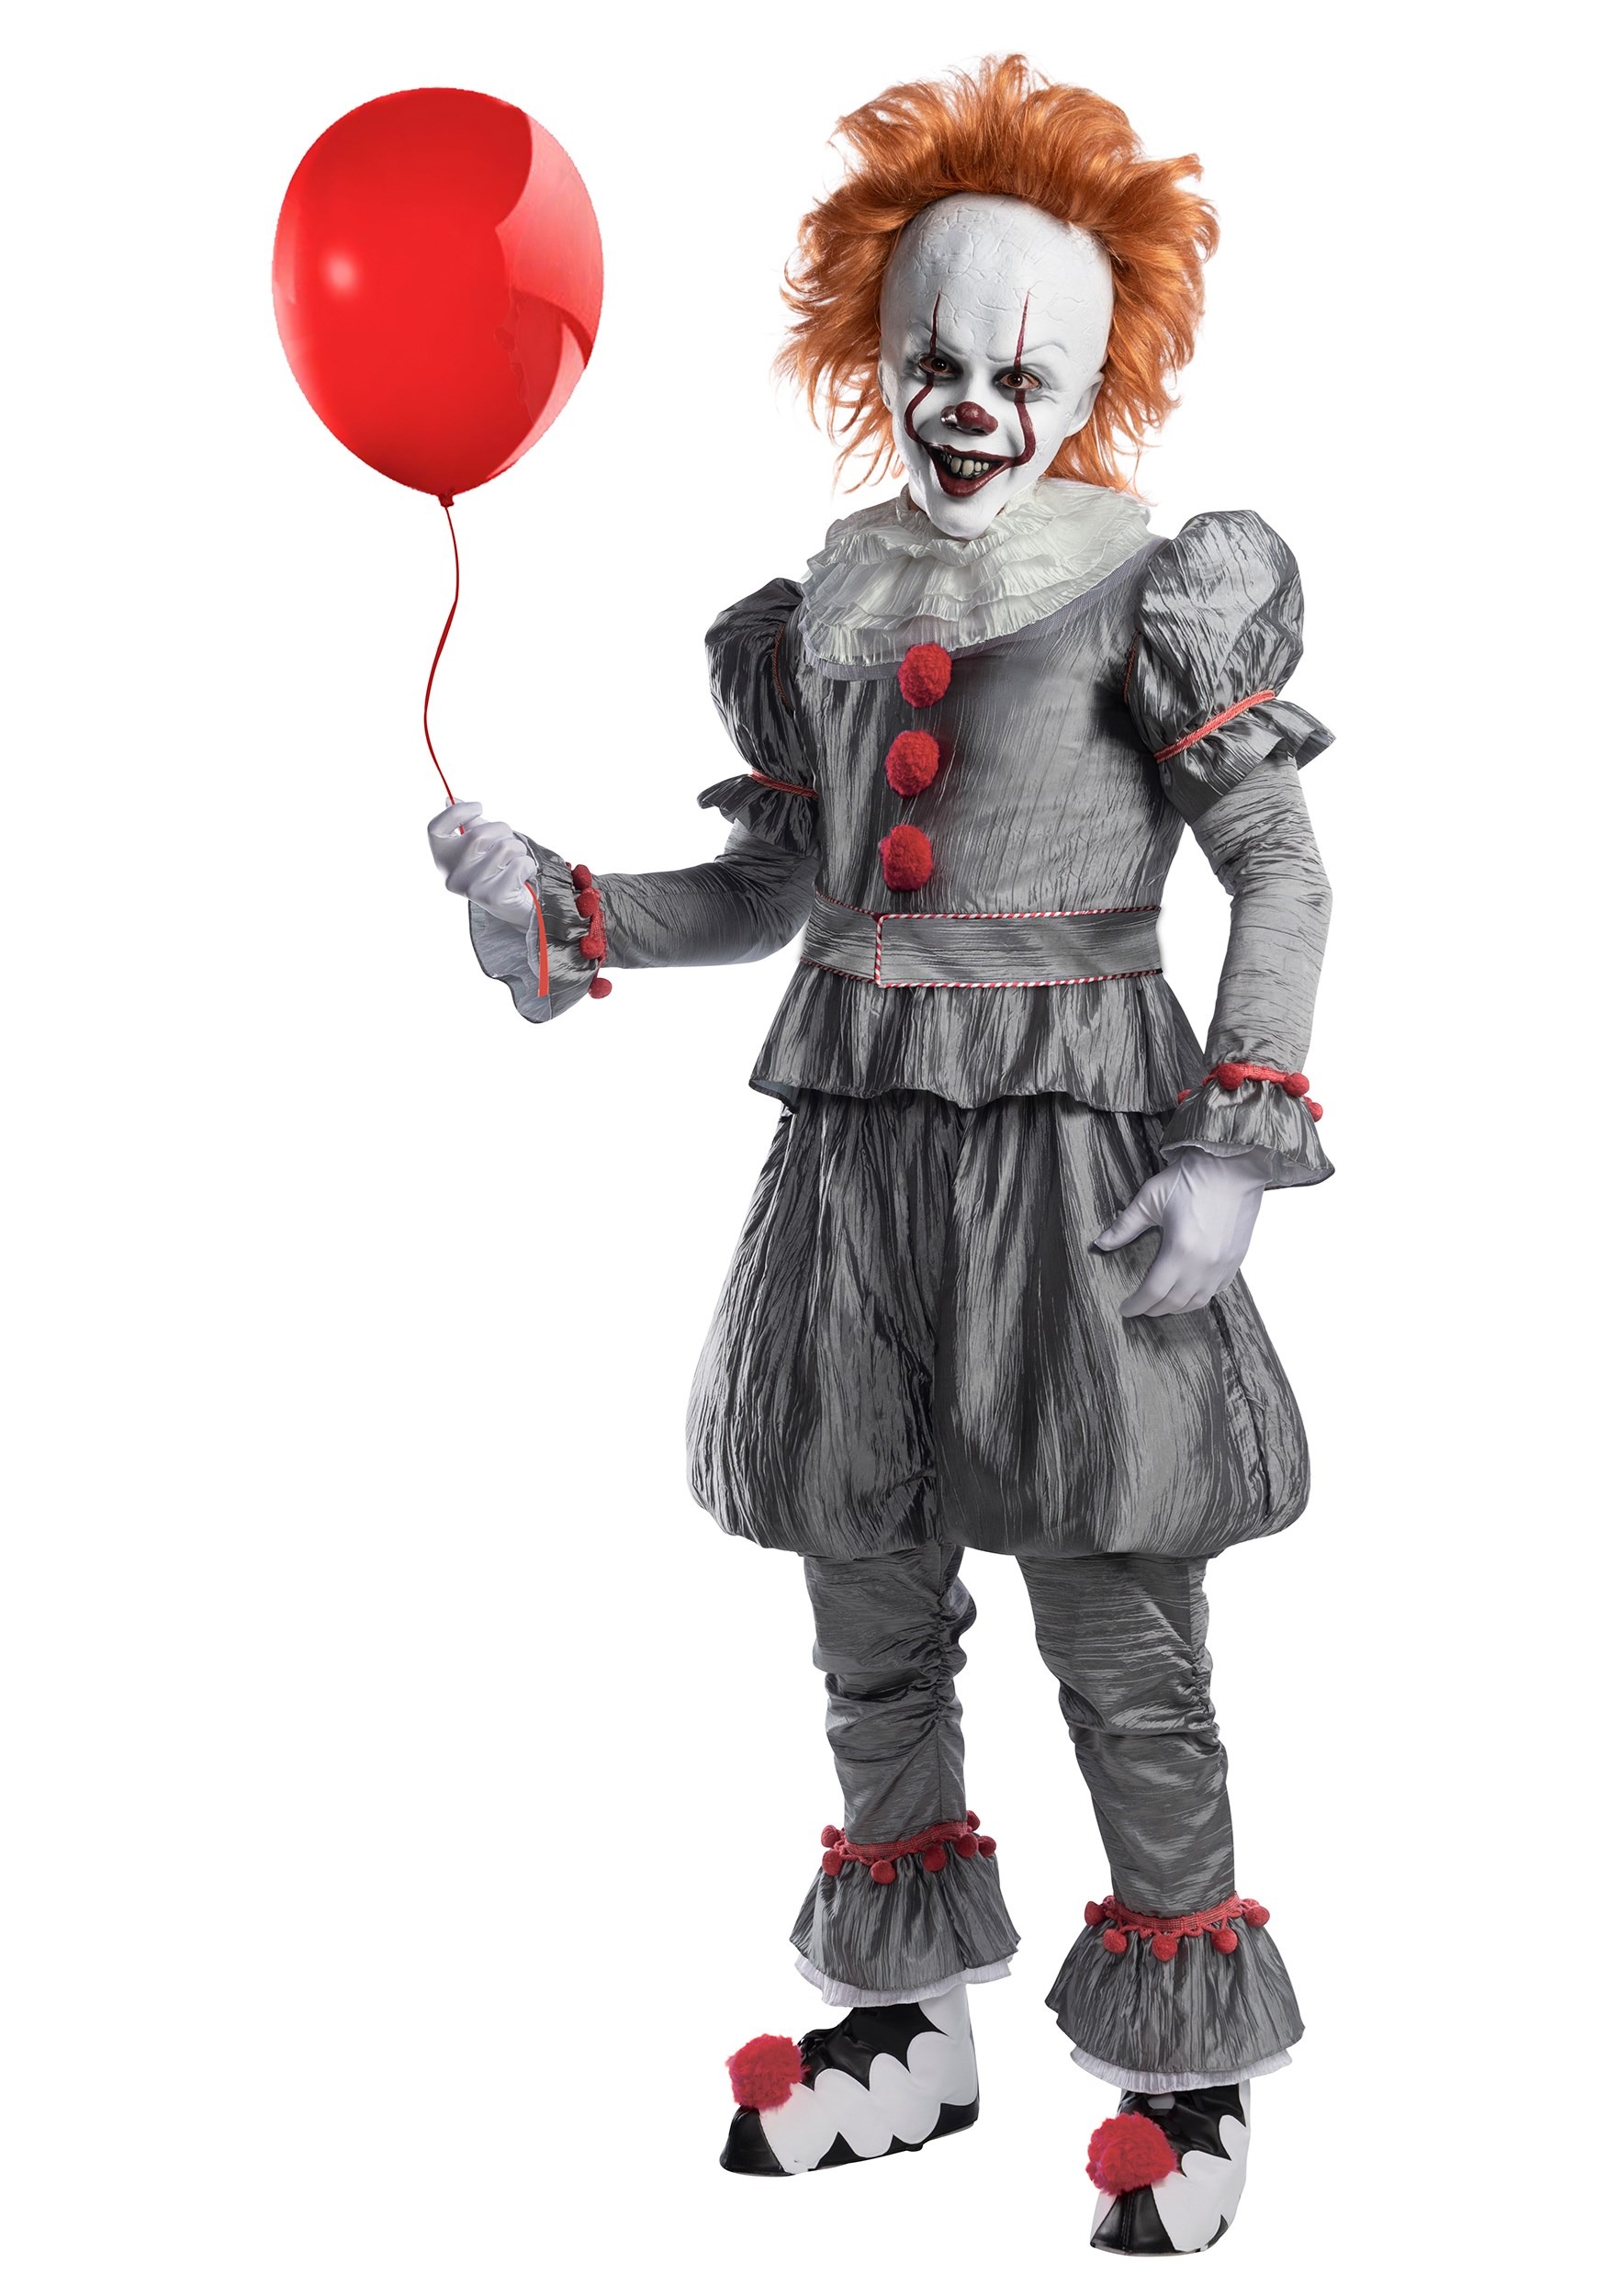 How to be pennywise for halloween | Julio's